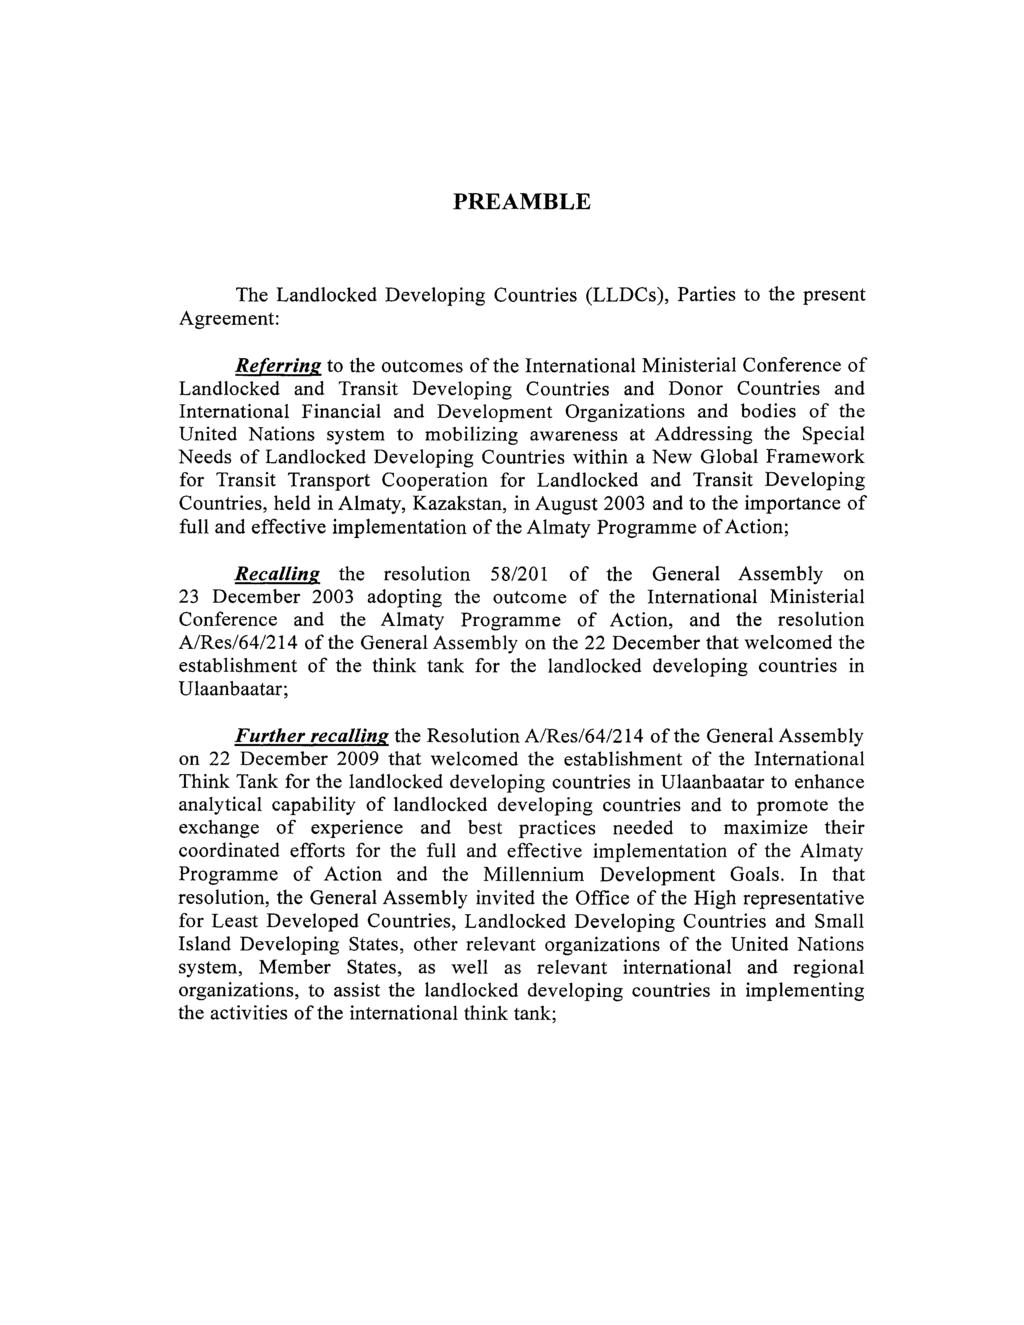 PREAMBLE The Landlocked Developing Countries (LLDCs), Parties to the present Agreement: Referring to the outcomes of the International Ministerial Conference of Landlocked and Transit Developing